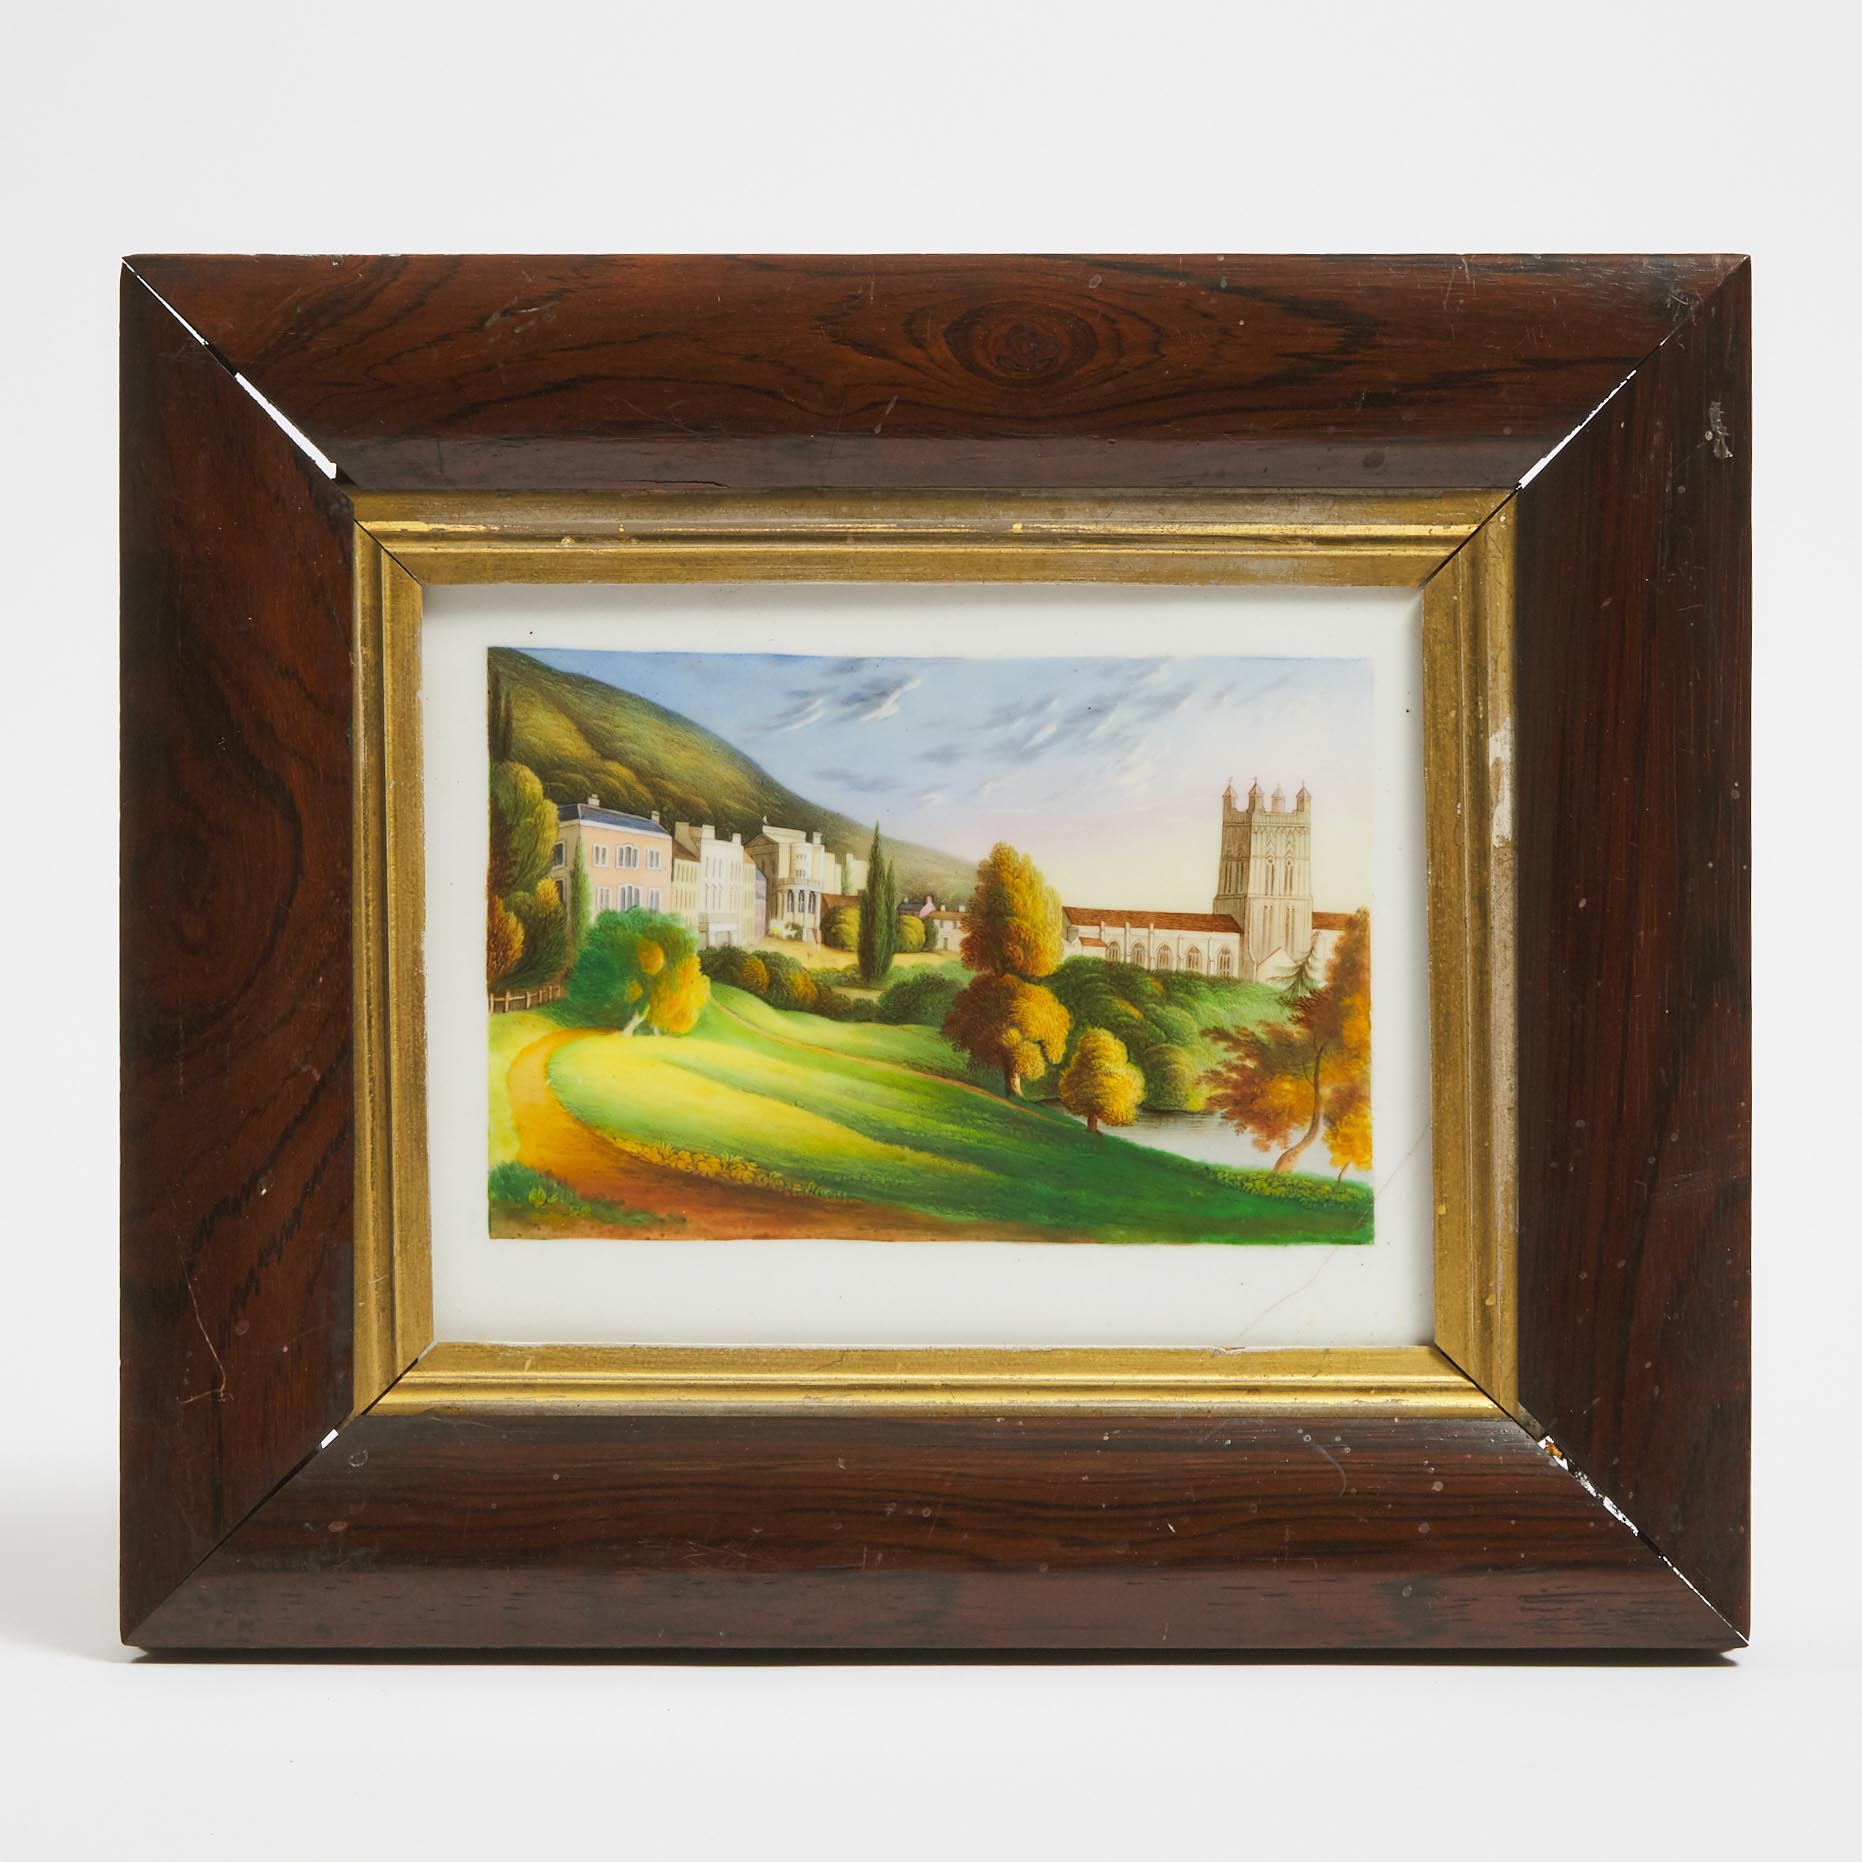 English Porcelain Rectangular Plaque of Malvern Abbey, probably Worcester, c.1830